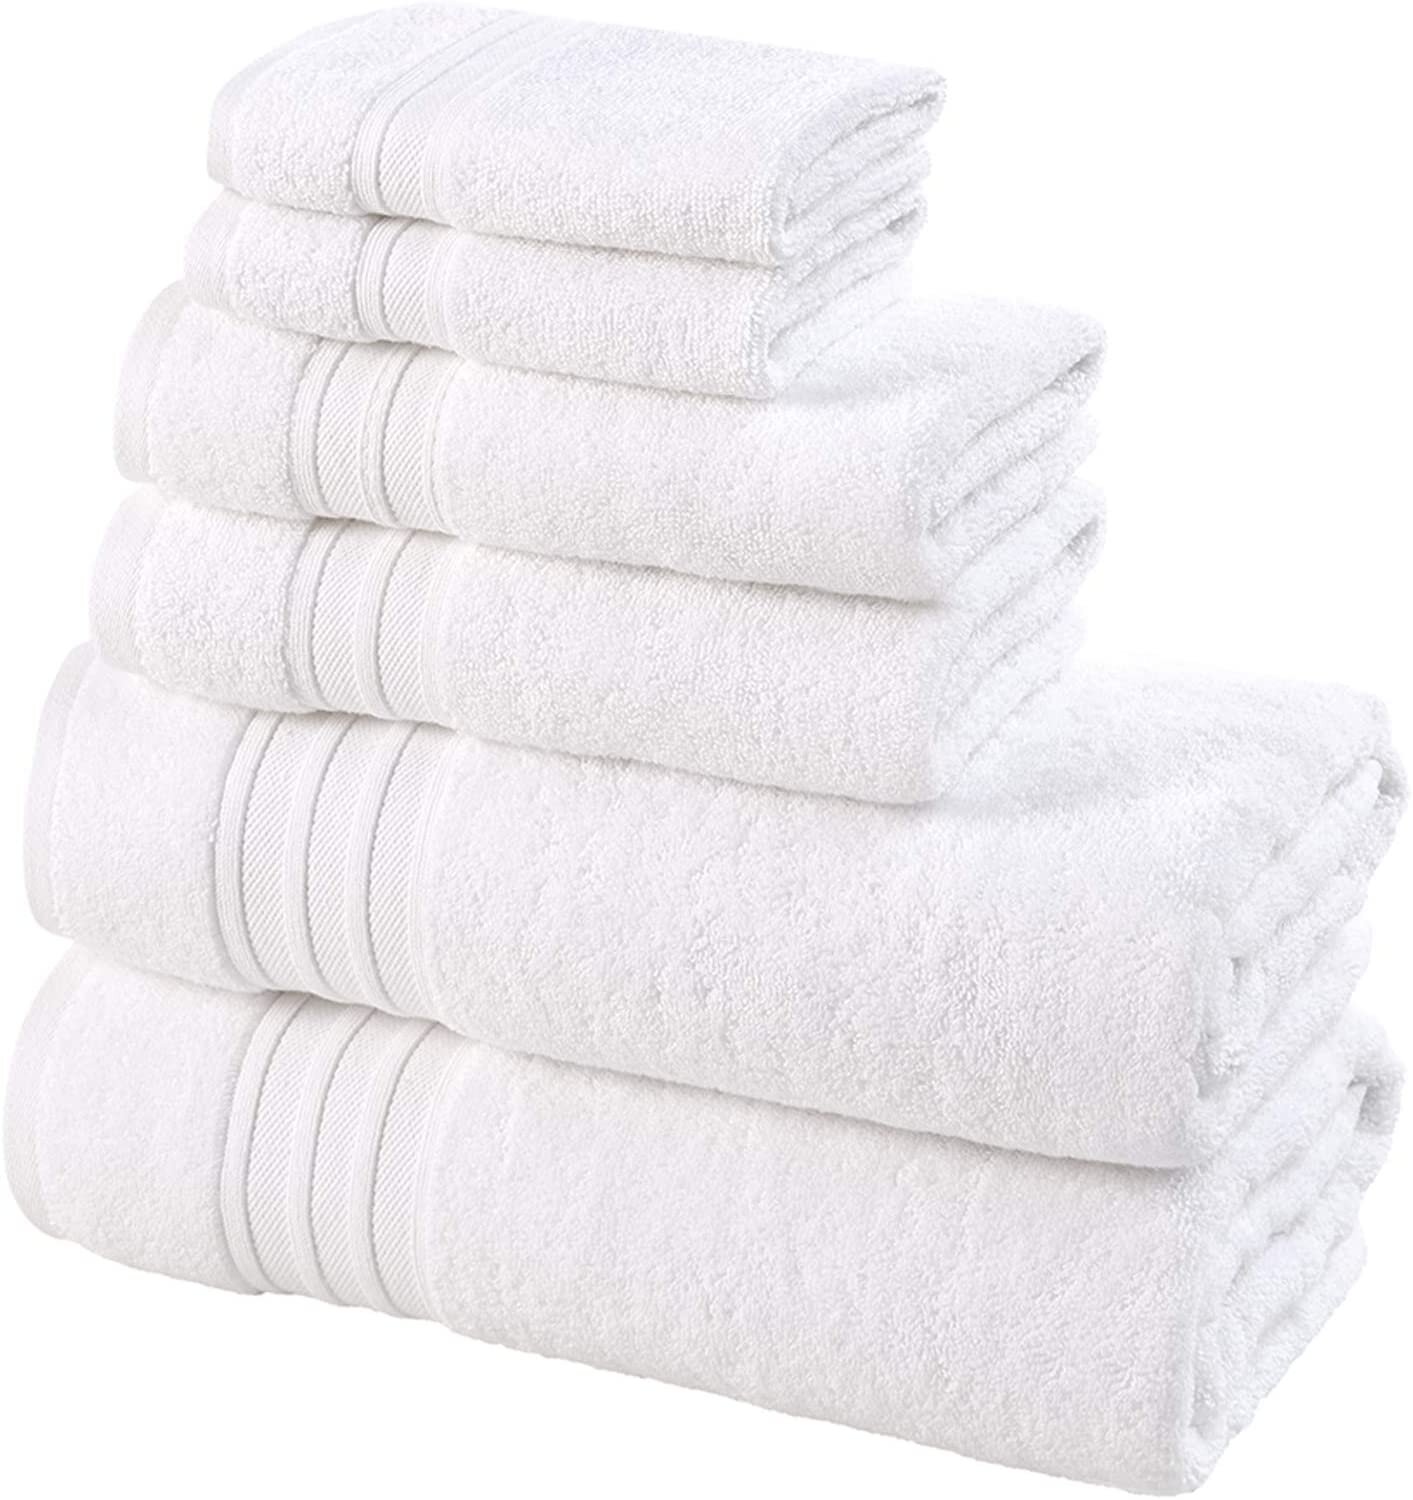 Bathroom Towel Set 4 Pack, Hotel Spa Quality, Super Soft Feel Towels,  Highly Absorbent, Luxury Turkish Fluffy Towels, Genuine Cotton 